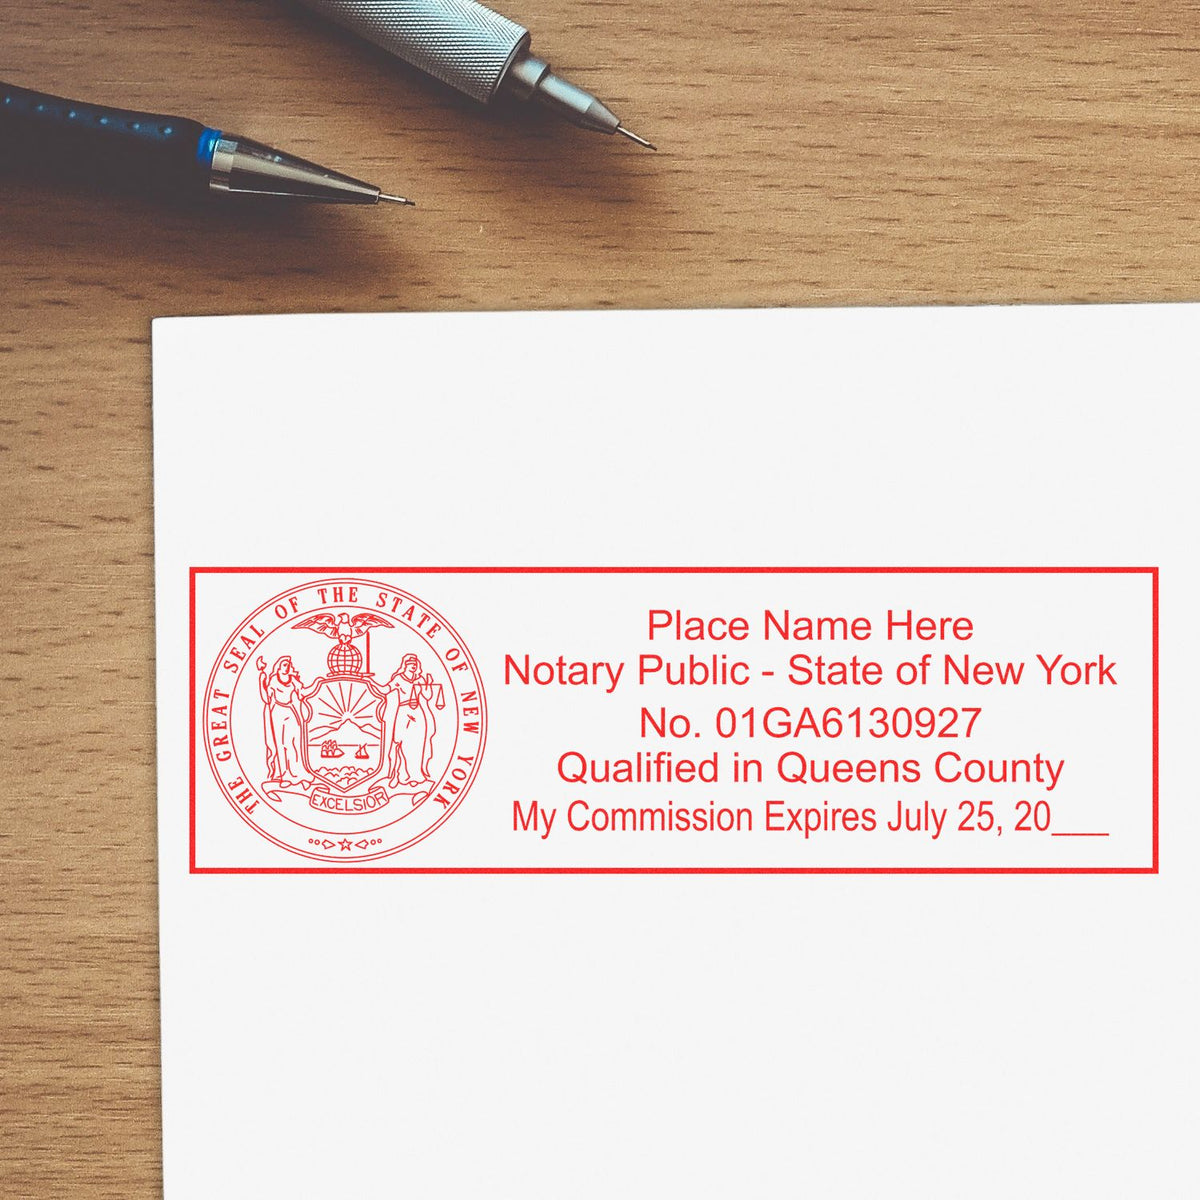 An alternative view of the Slim Pre-Inked State Seal Notary Stamp for New York stamped on a sheet of paper showing the image in use